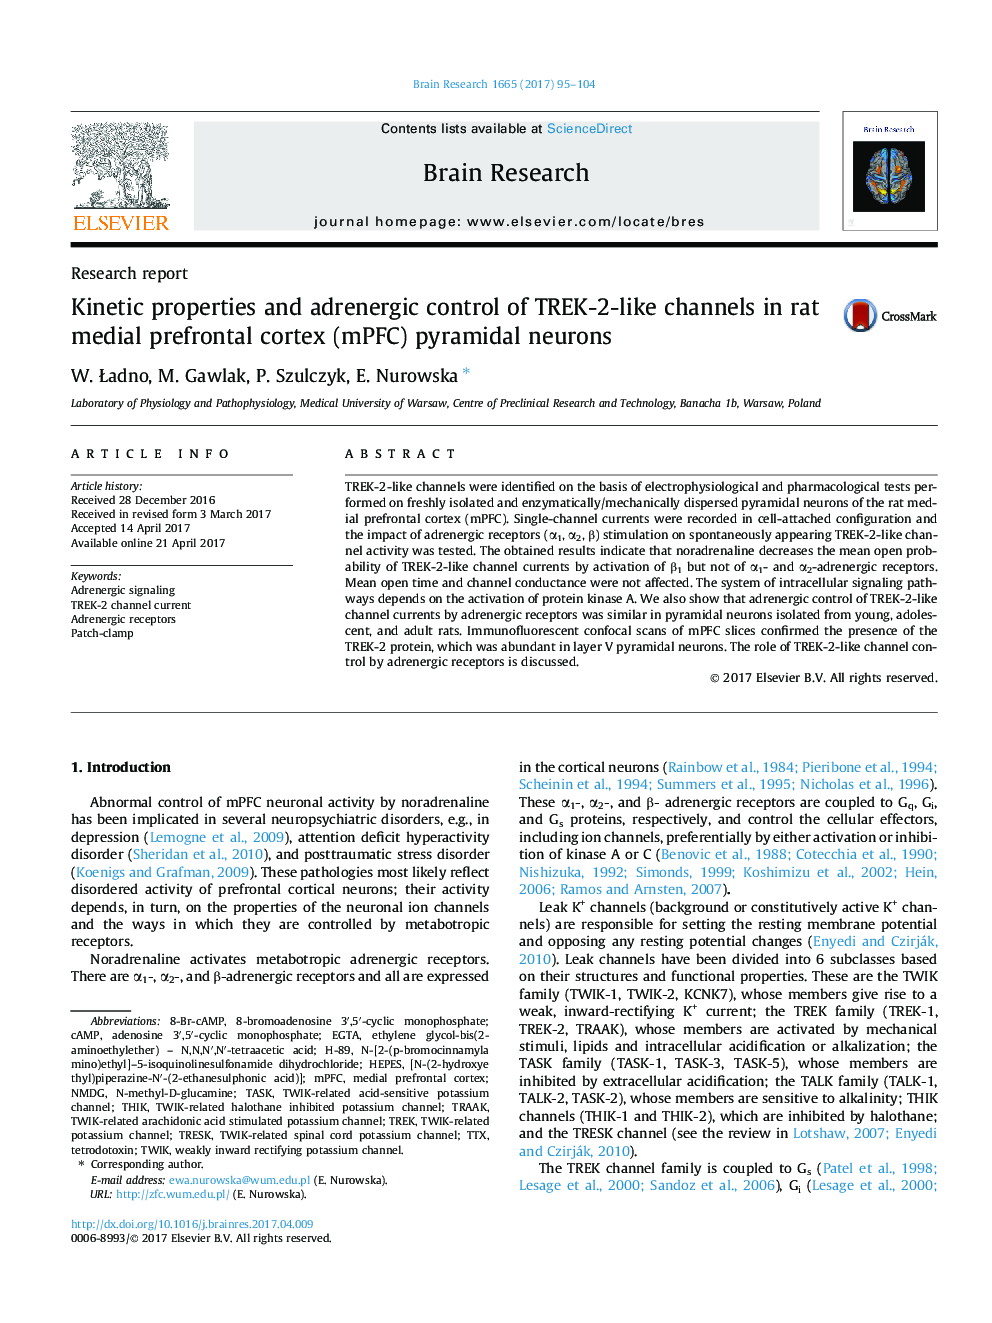 Kinetic properties and adrenergic control of TREK-2-like channels in rat medial prefrontal cortex (mPFC) pyramidal neurons